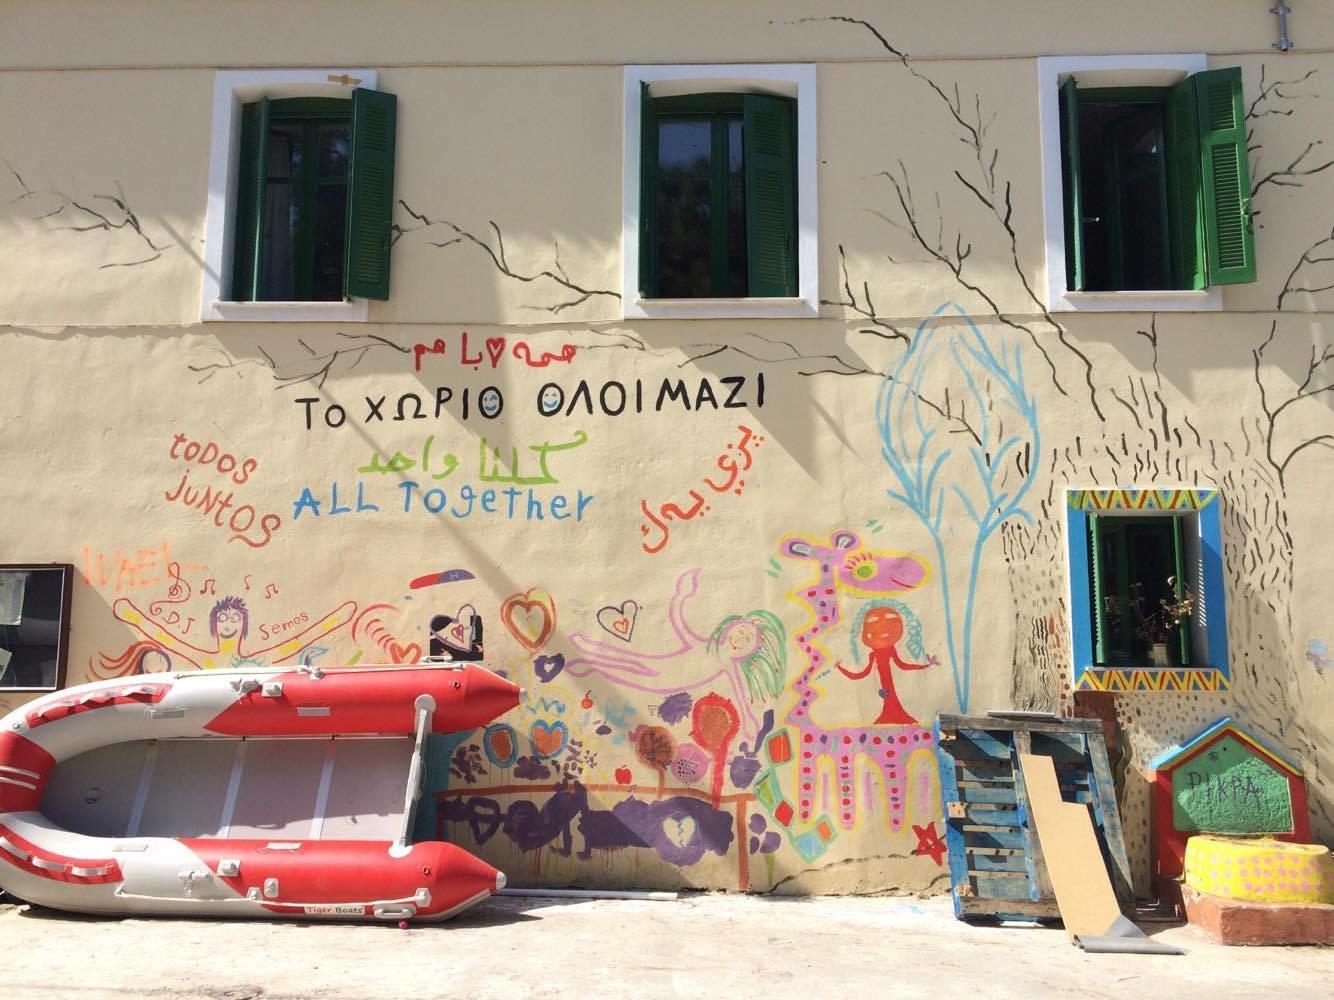 Mural painting welcoming asylum seekers and migrants at PIKPA, a volunteer-run camp on Lesbos island, Greece. Since 2012 thousands of people fleeing war and persecution who have reached the island have found shelter at PIKPA.